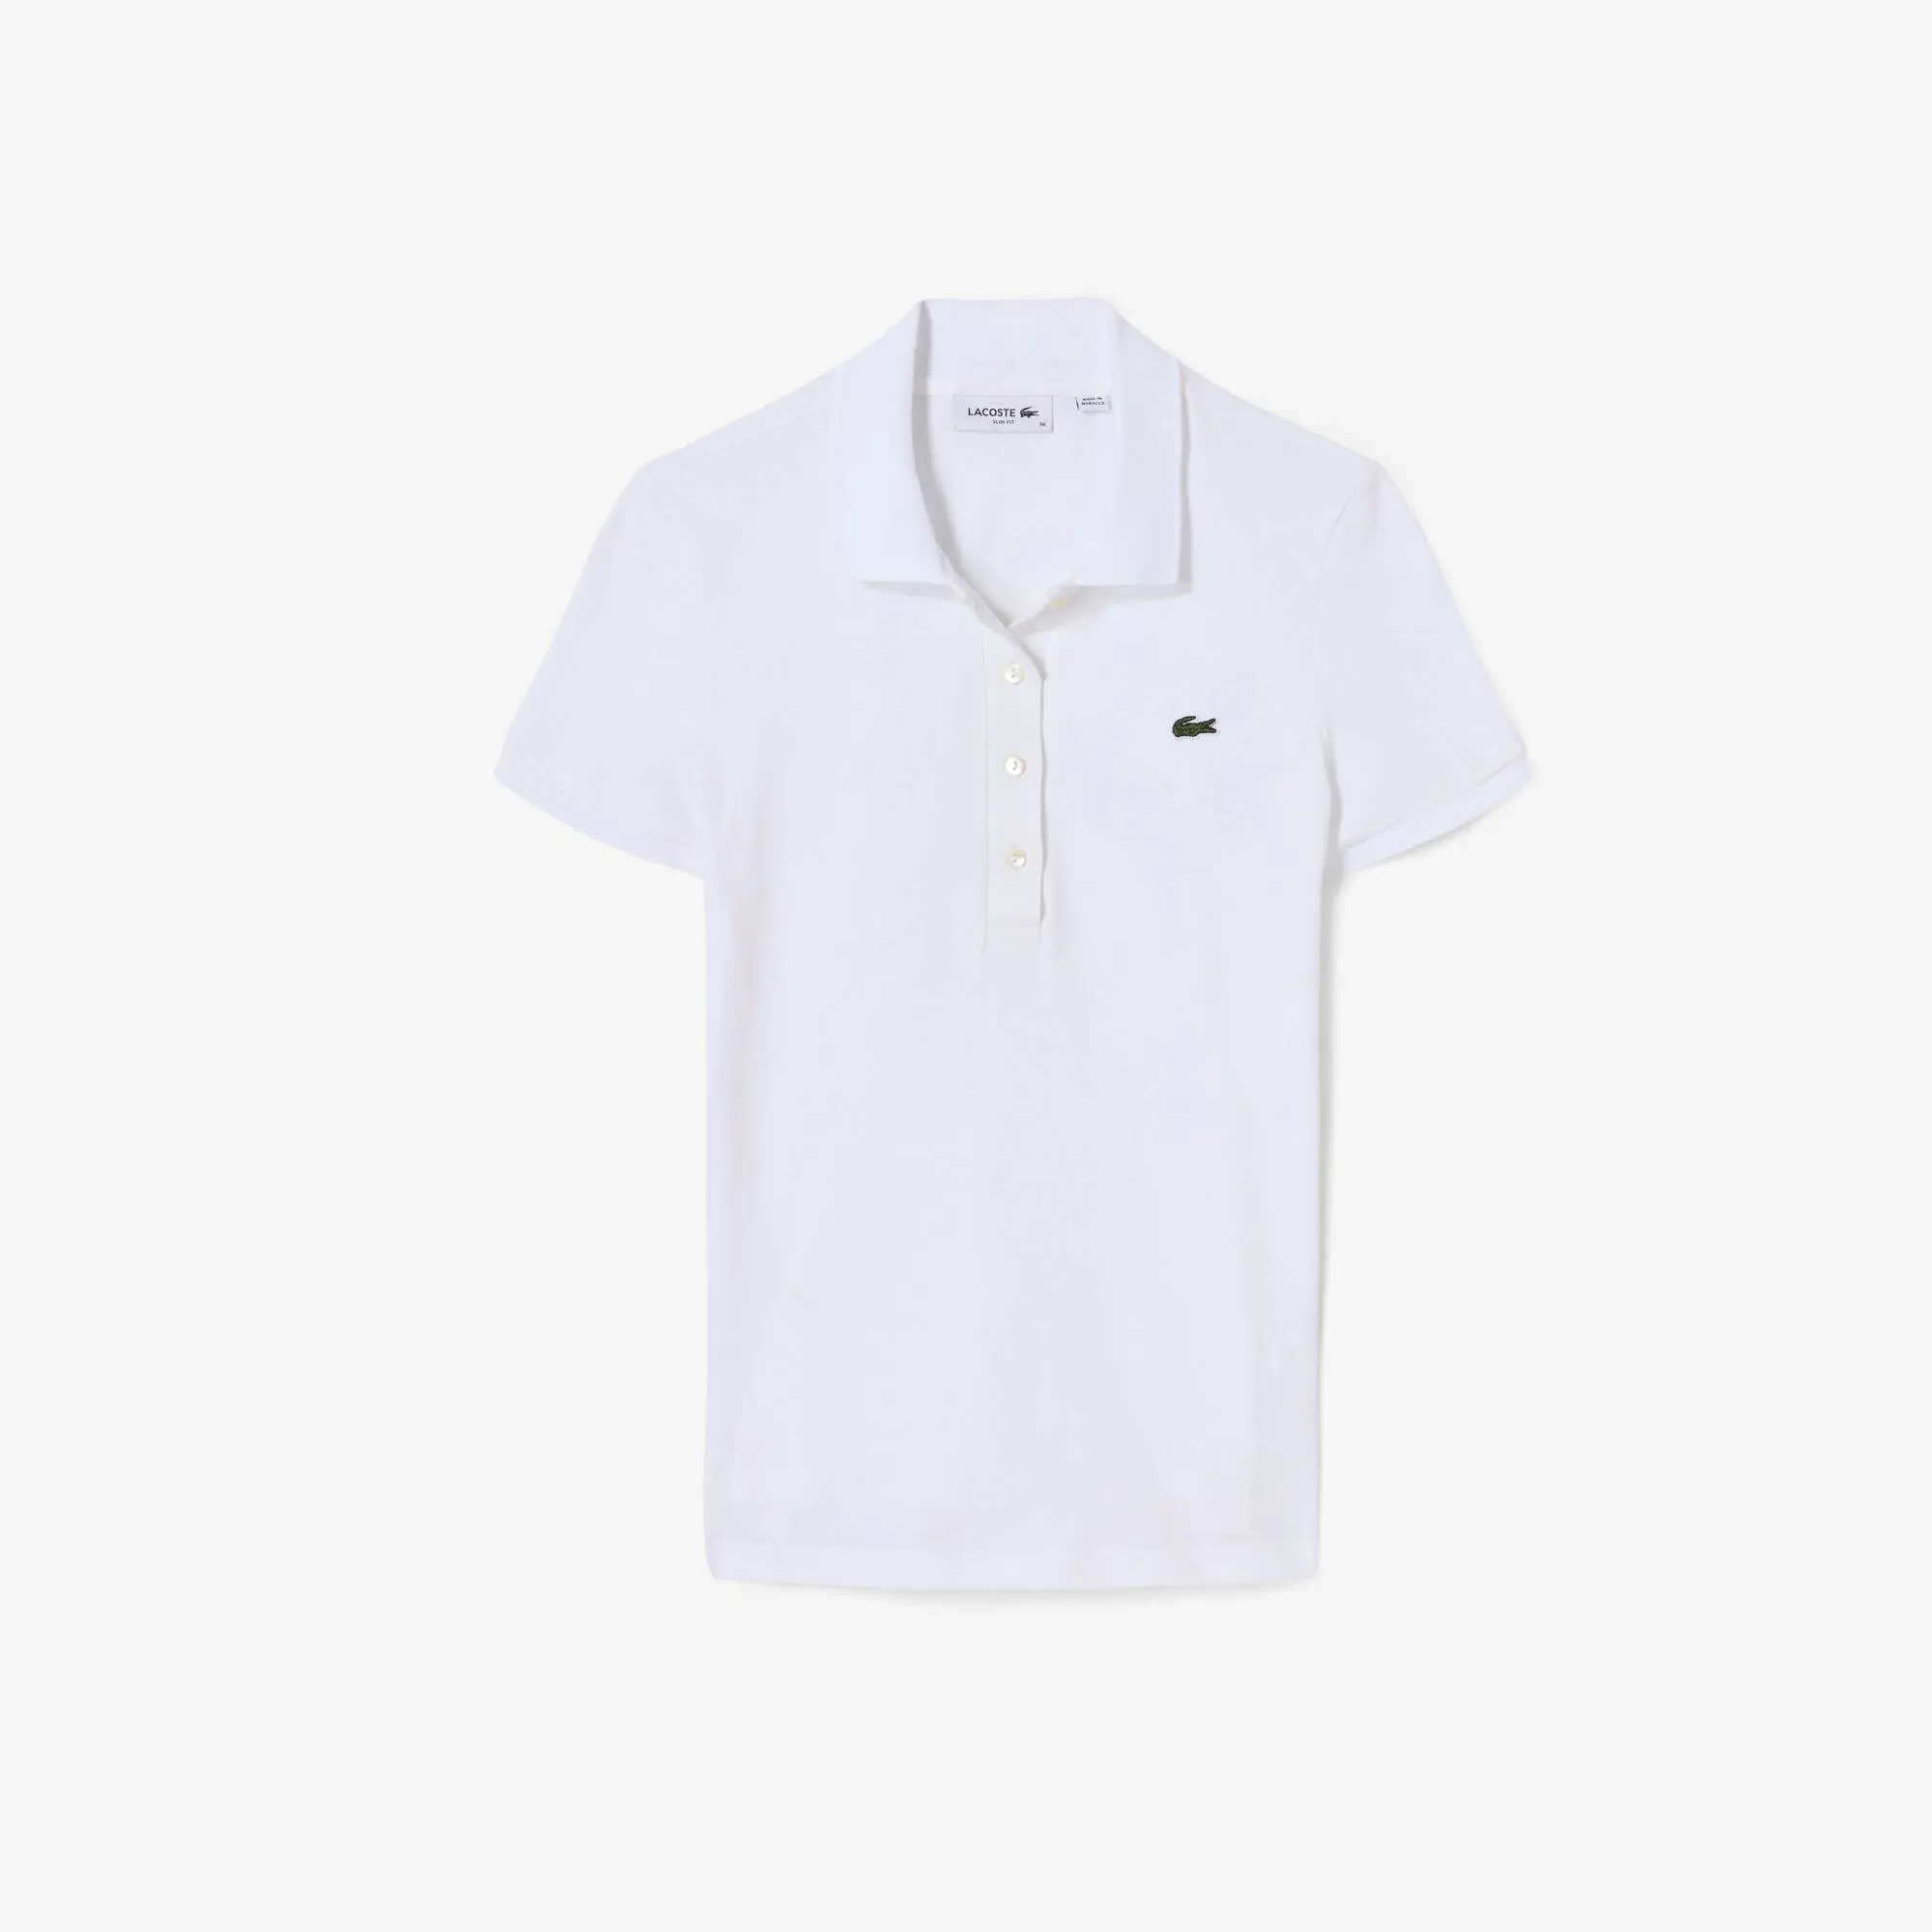 Lacoste Slim Fit Stretch Cotton Jersey Polo Shirt. 2